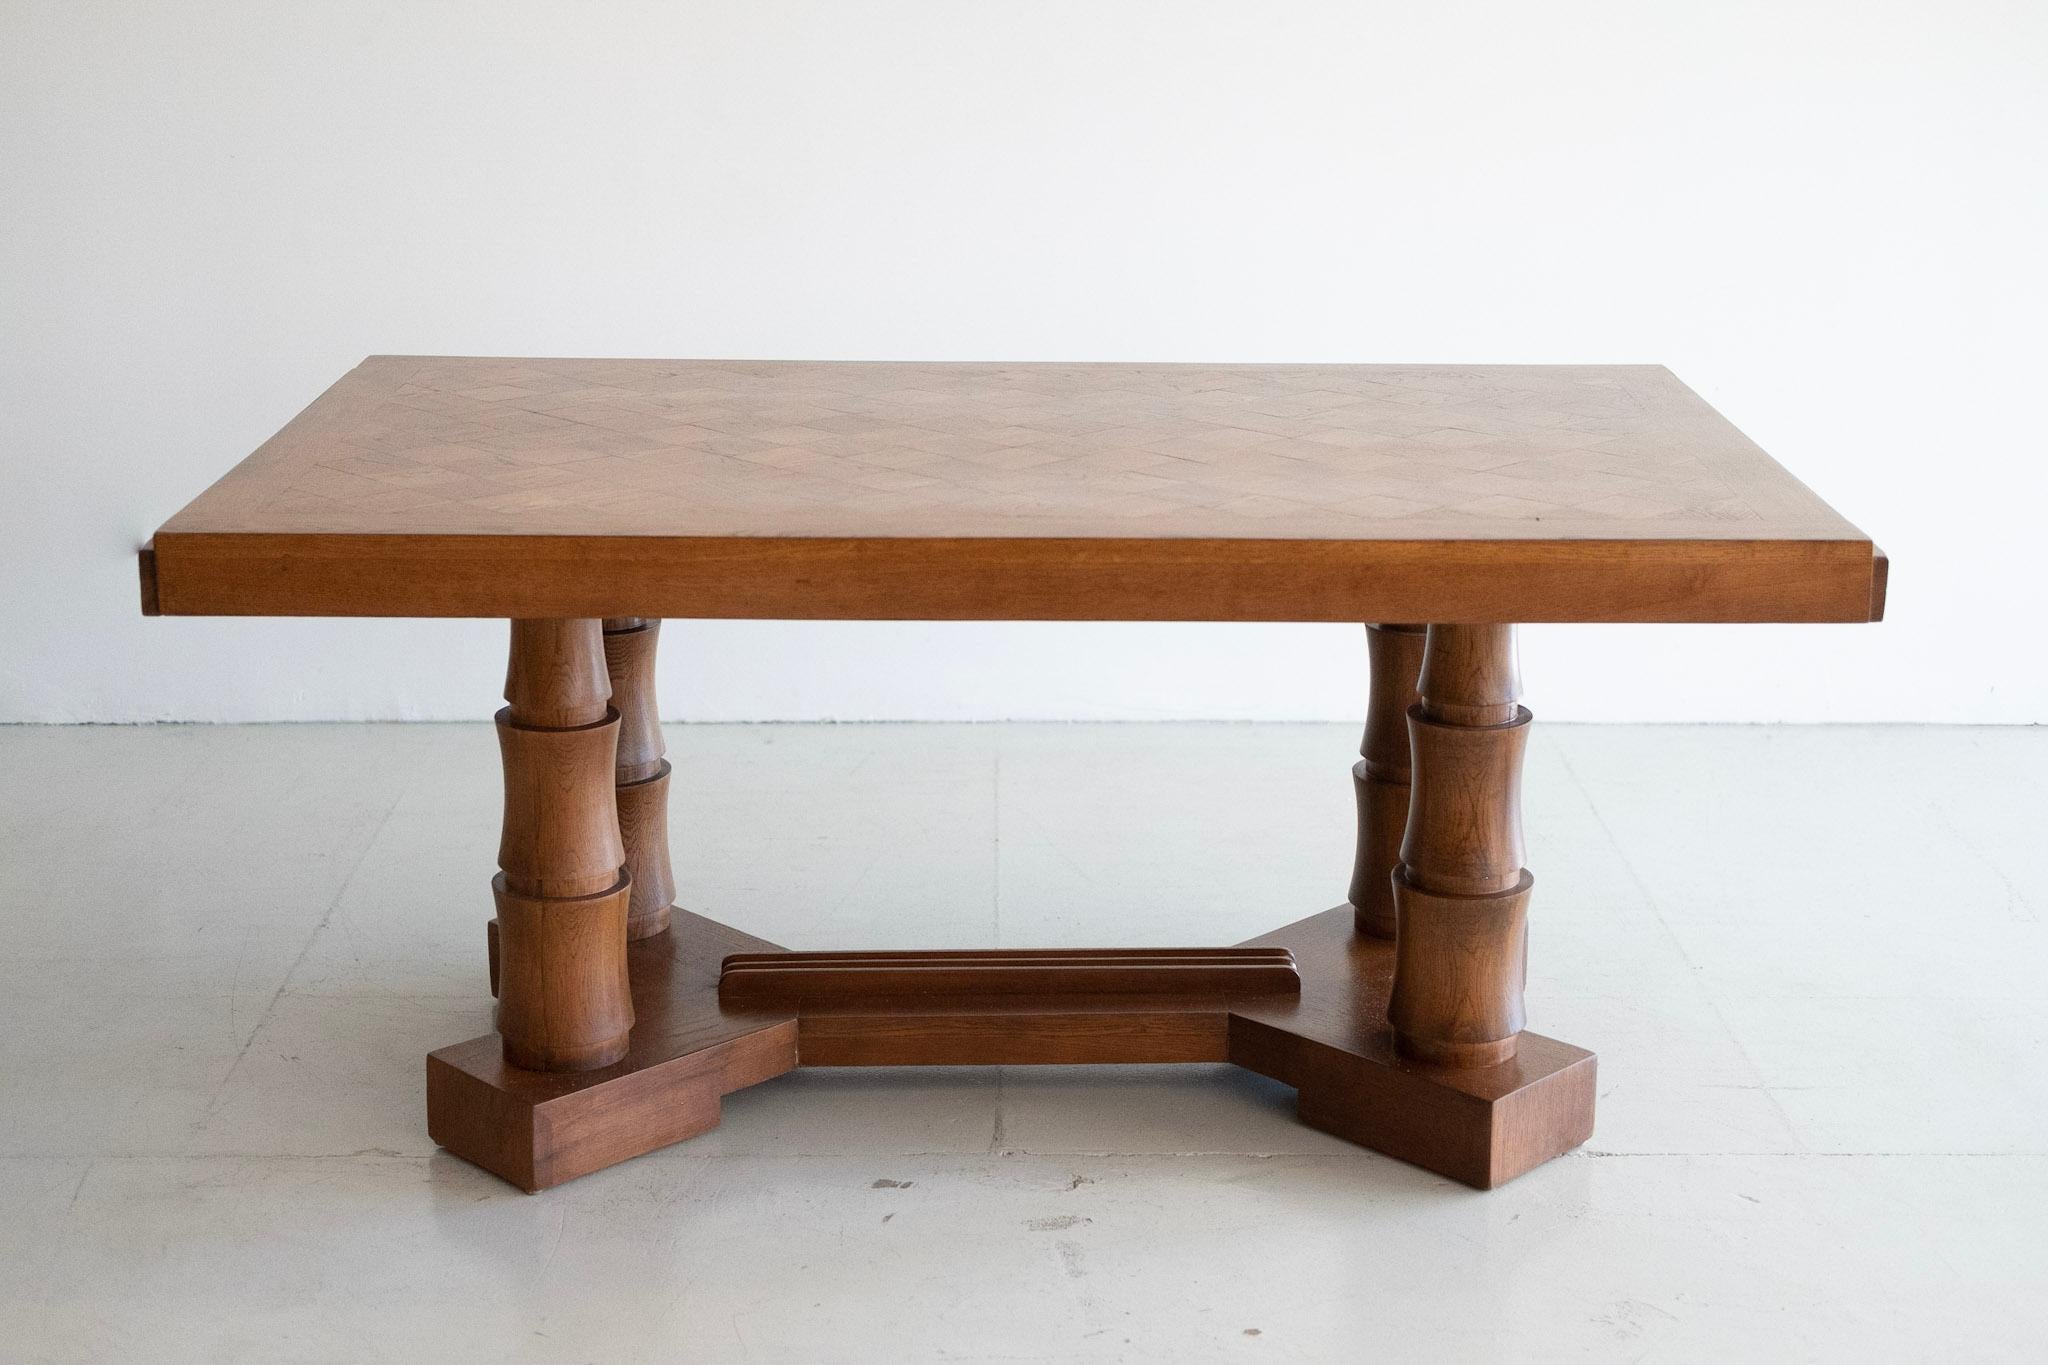 Beautiful oak table by Charles Dudouyt with carved pedestal legs.
Gorgeous butcher block patchwork oak top. 
Newly refinished with wonderful patina.